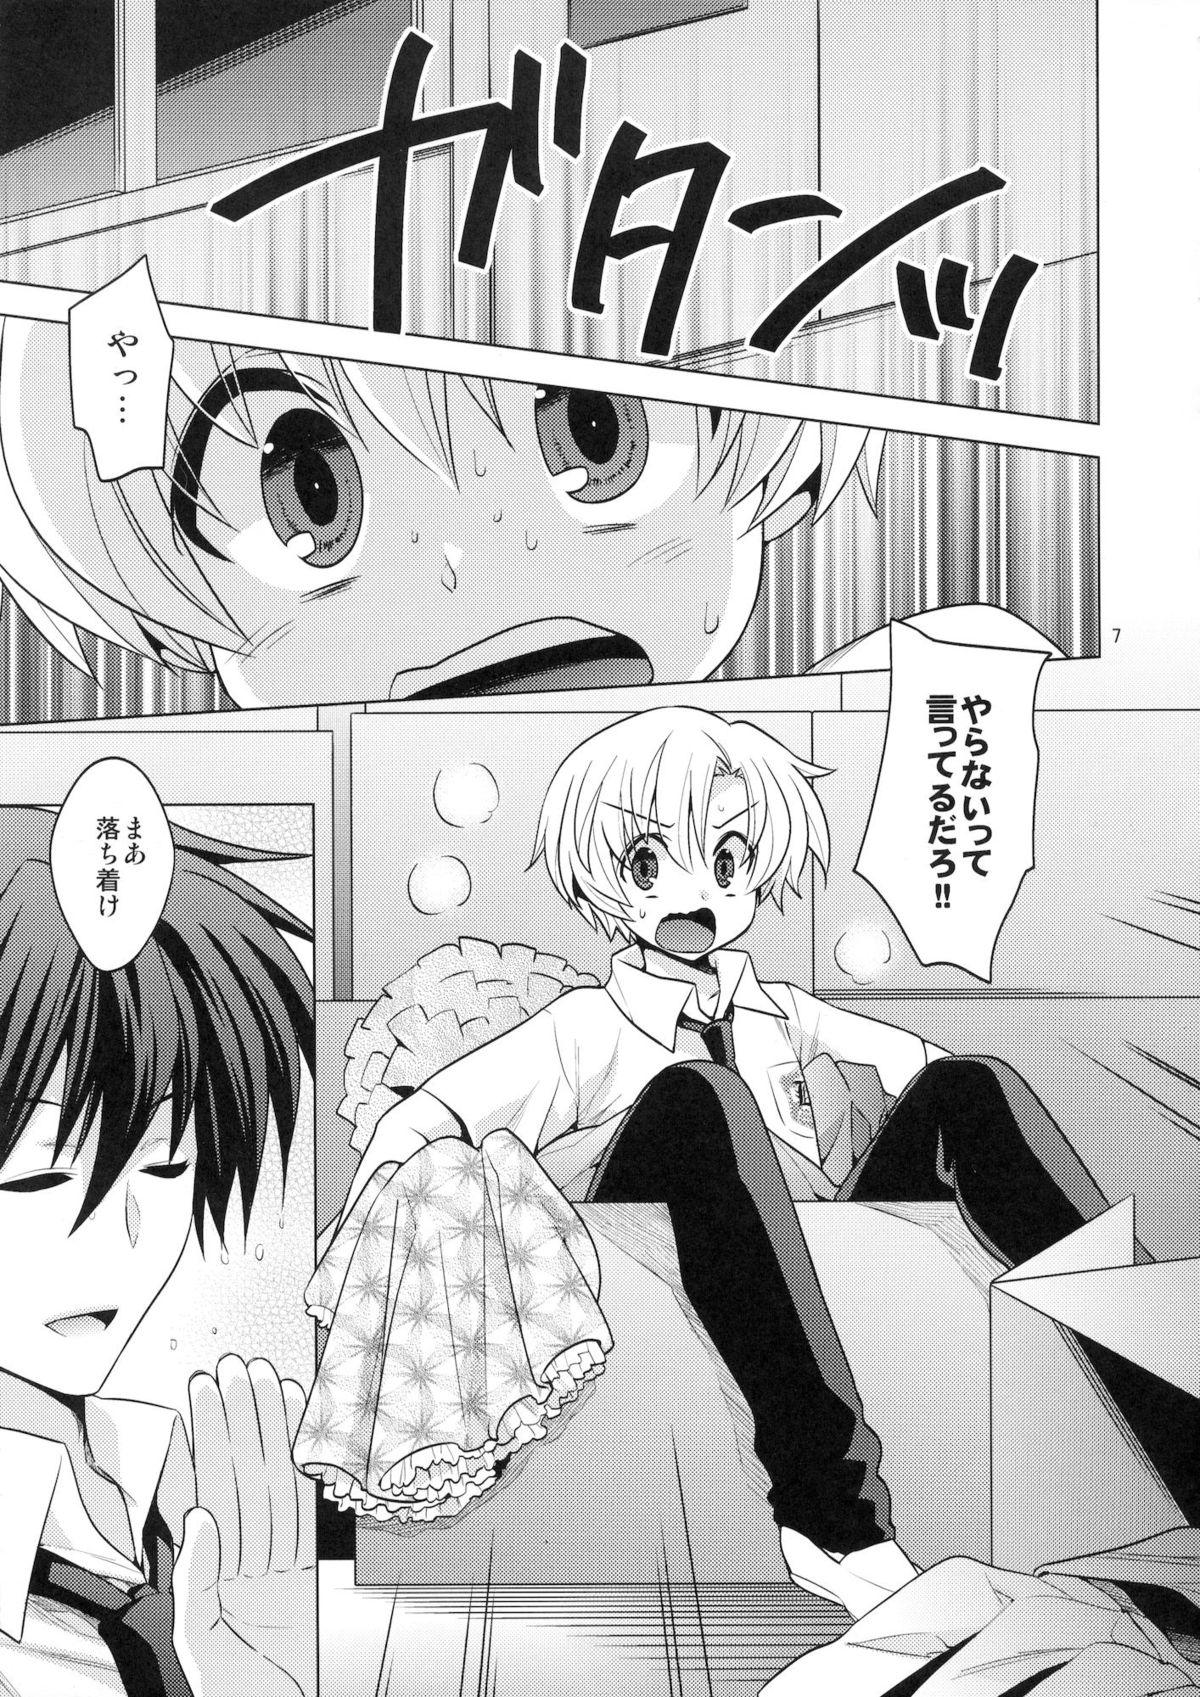  Sunohara Mania 6 - Clannad Blows - Page 5